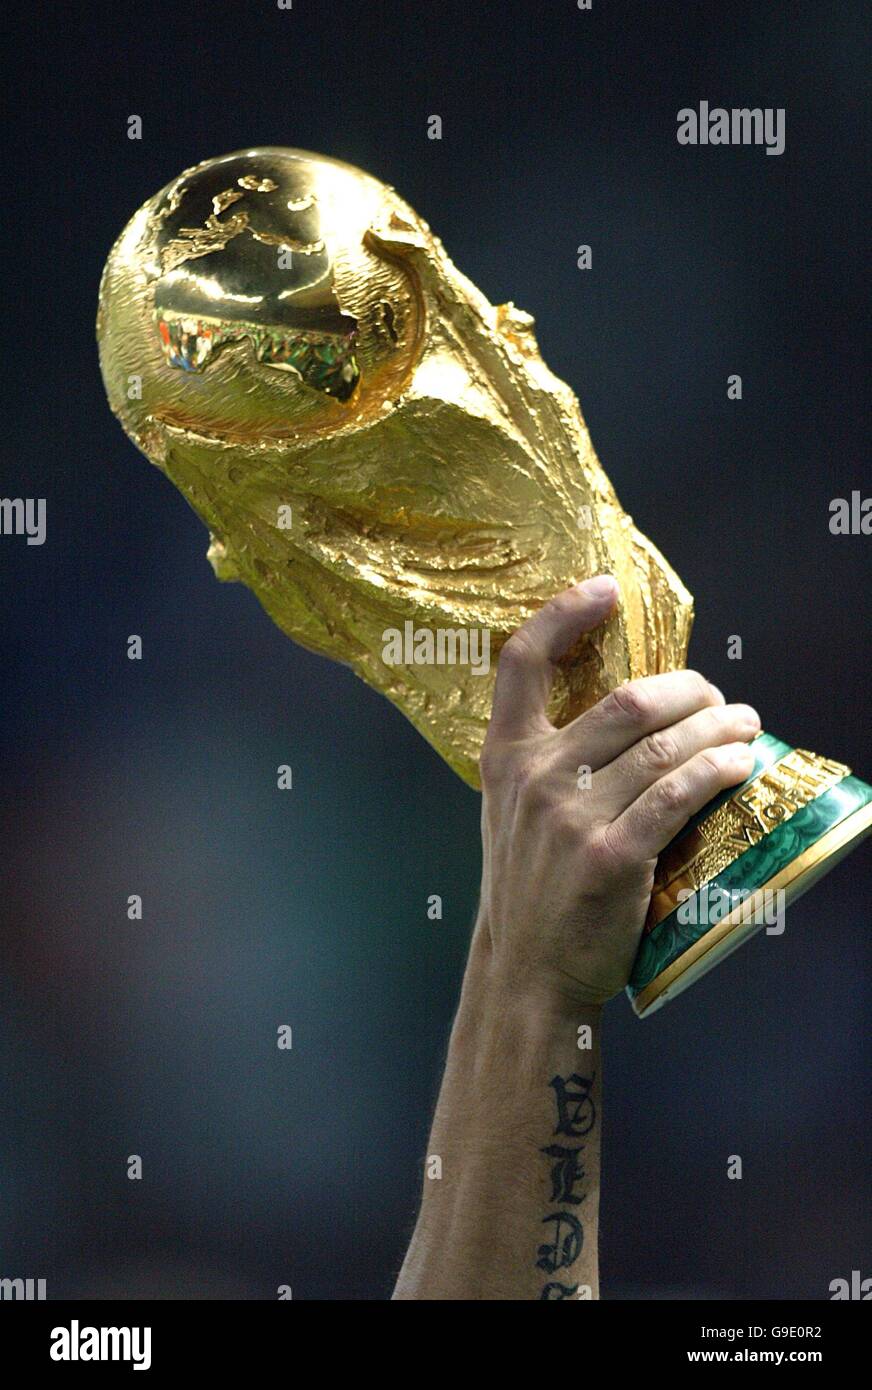 Soccer - 2006 FIFA World Cup Germany - Final - Italy v France - Olympiastadion - Berlin. Italy players hold aloft the FIFA World Cup trophy Stock Photo